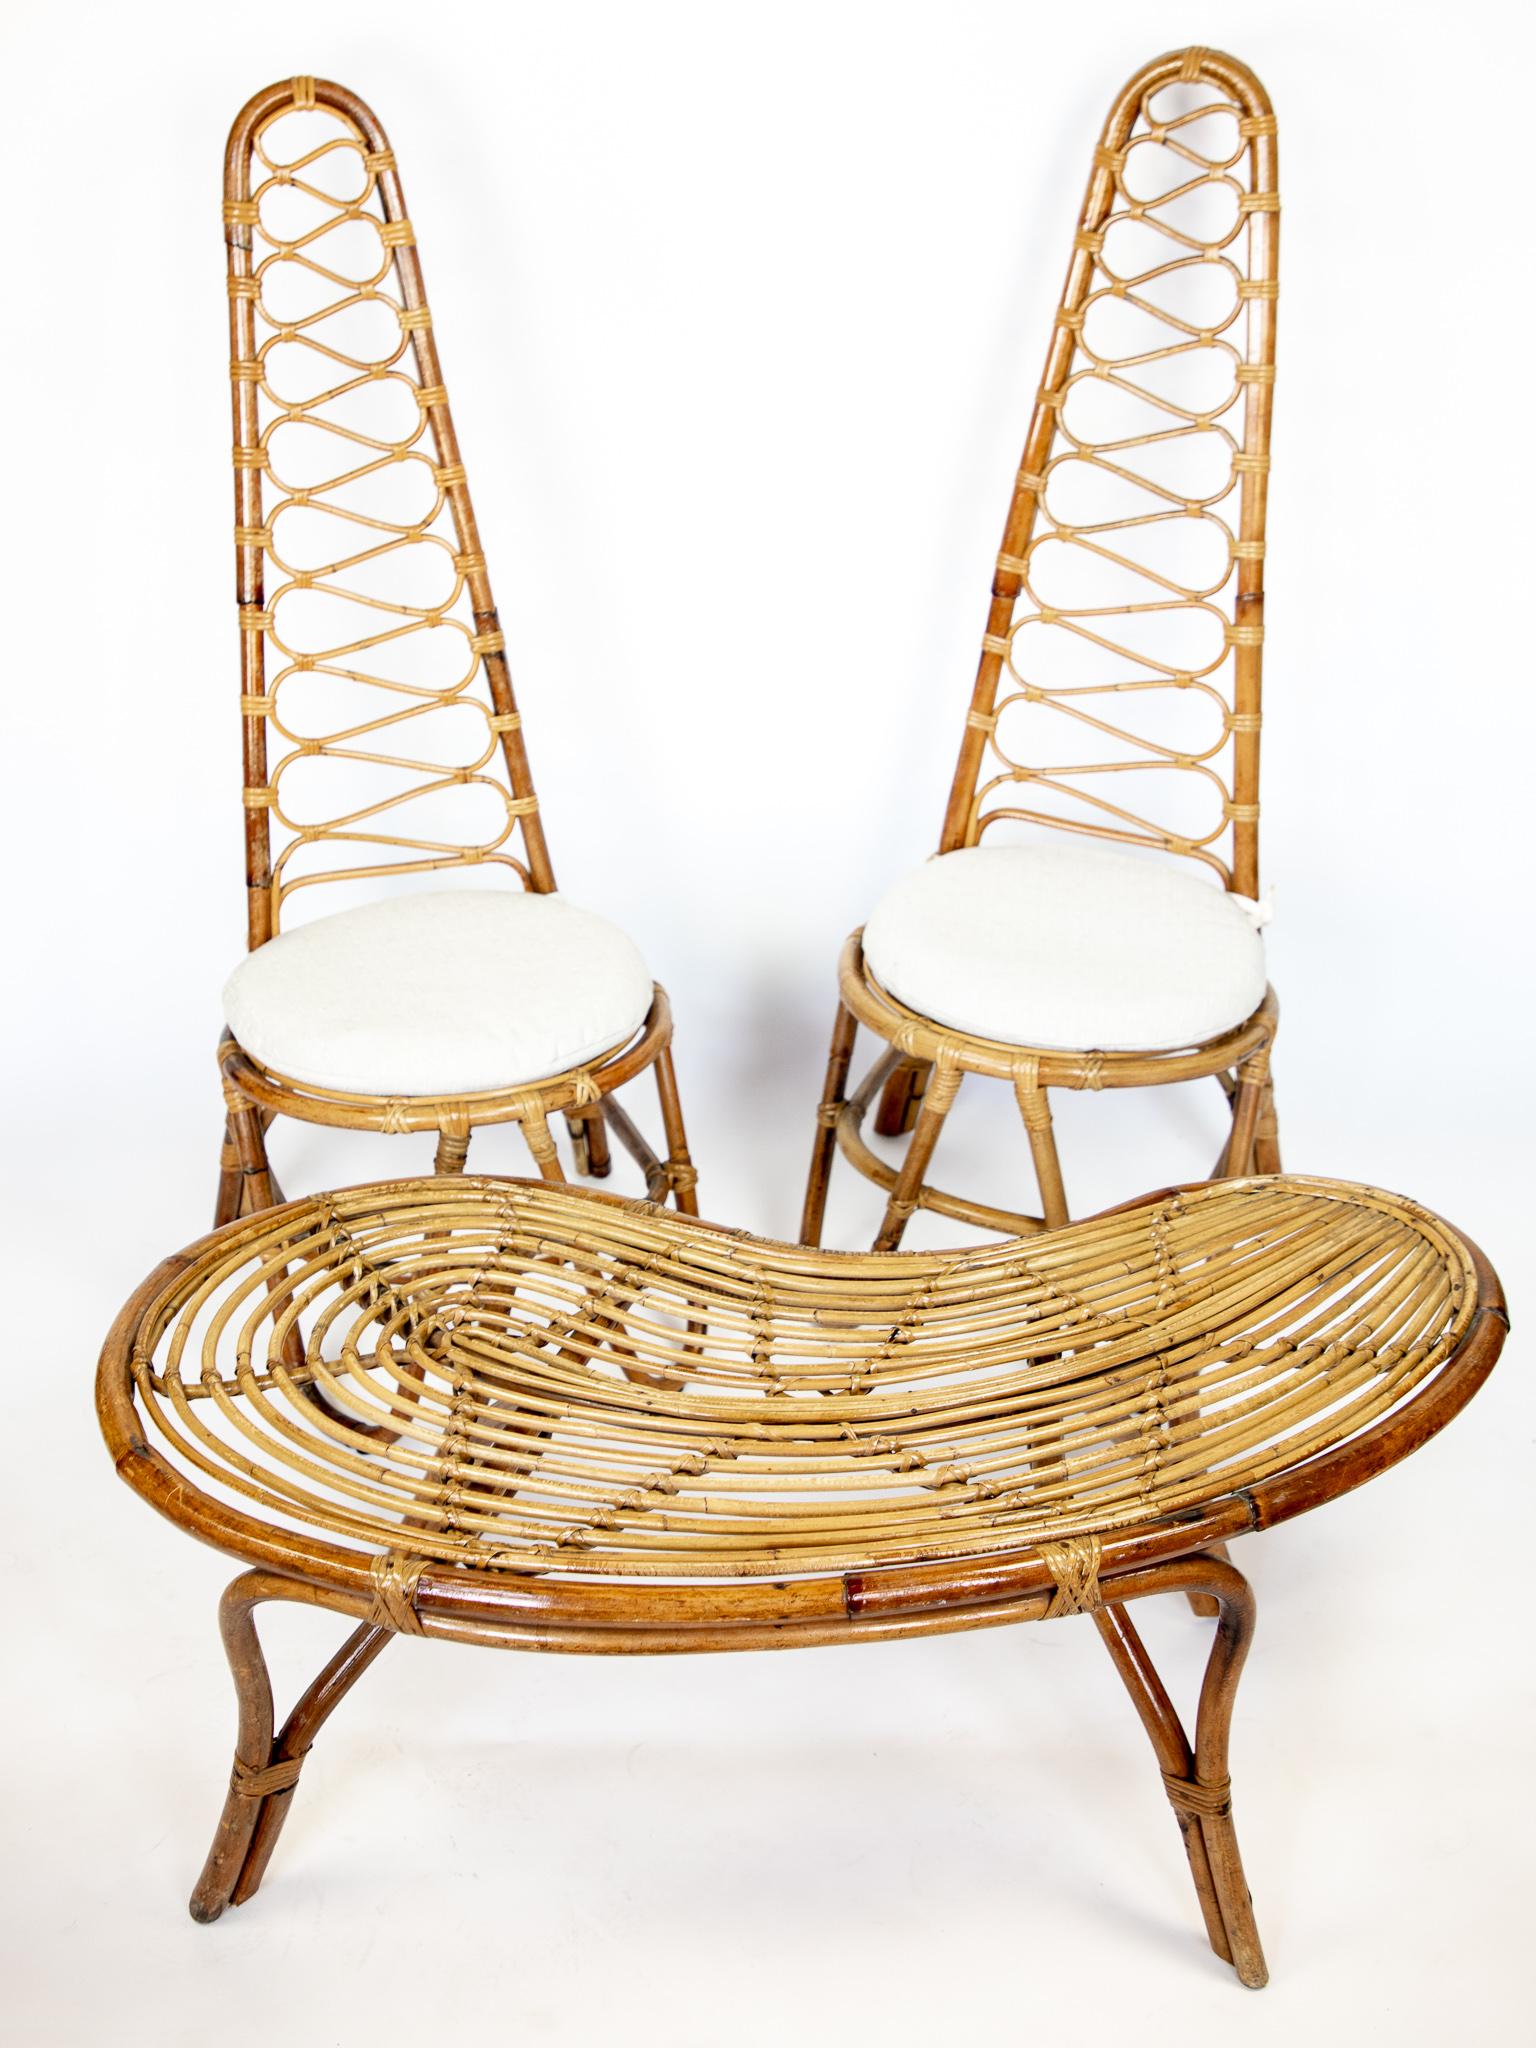 Mid-Century Modern high back rattan chairs and table, Italy 1960s.
This lovely set of two original Italian midcentury high back rattan chairs and a small table was often found in the entrance halls of the typical splendid villas in Italy in the